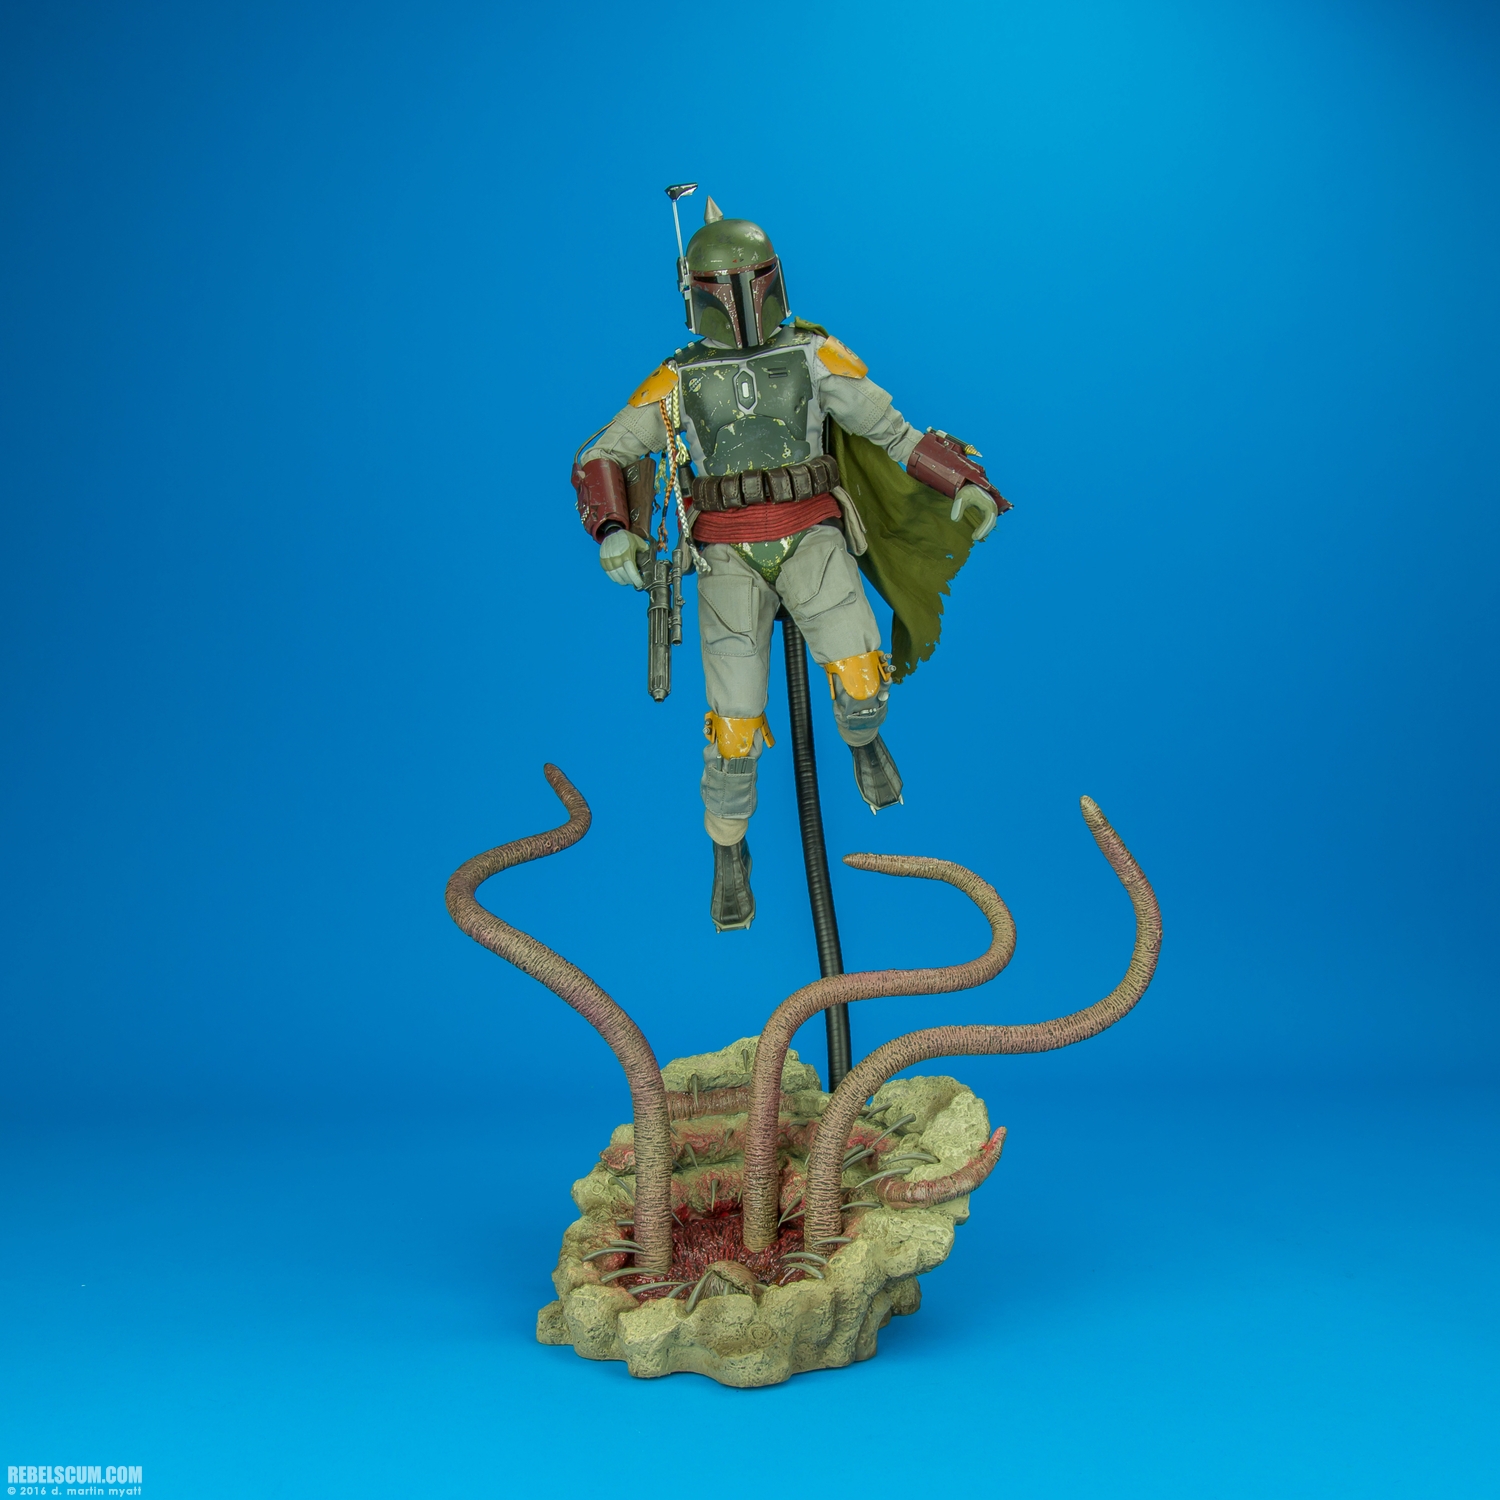 Hot-Toys-MMS313-Boba-Fett-Deluxe-Collectible-Figure-013.jpg